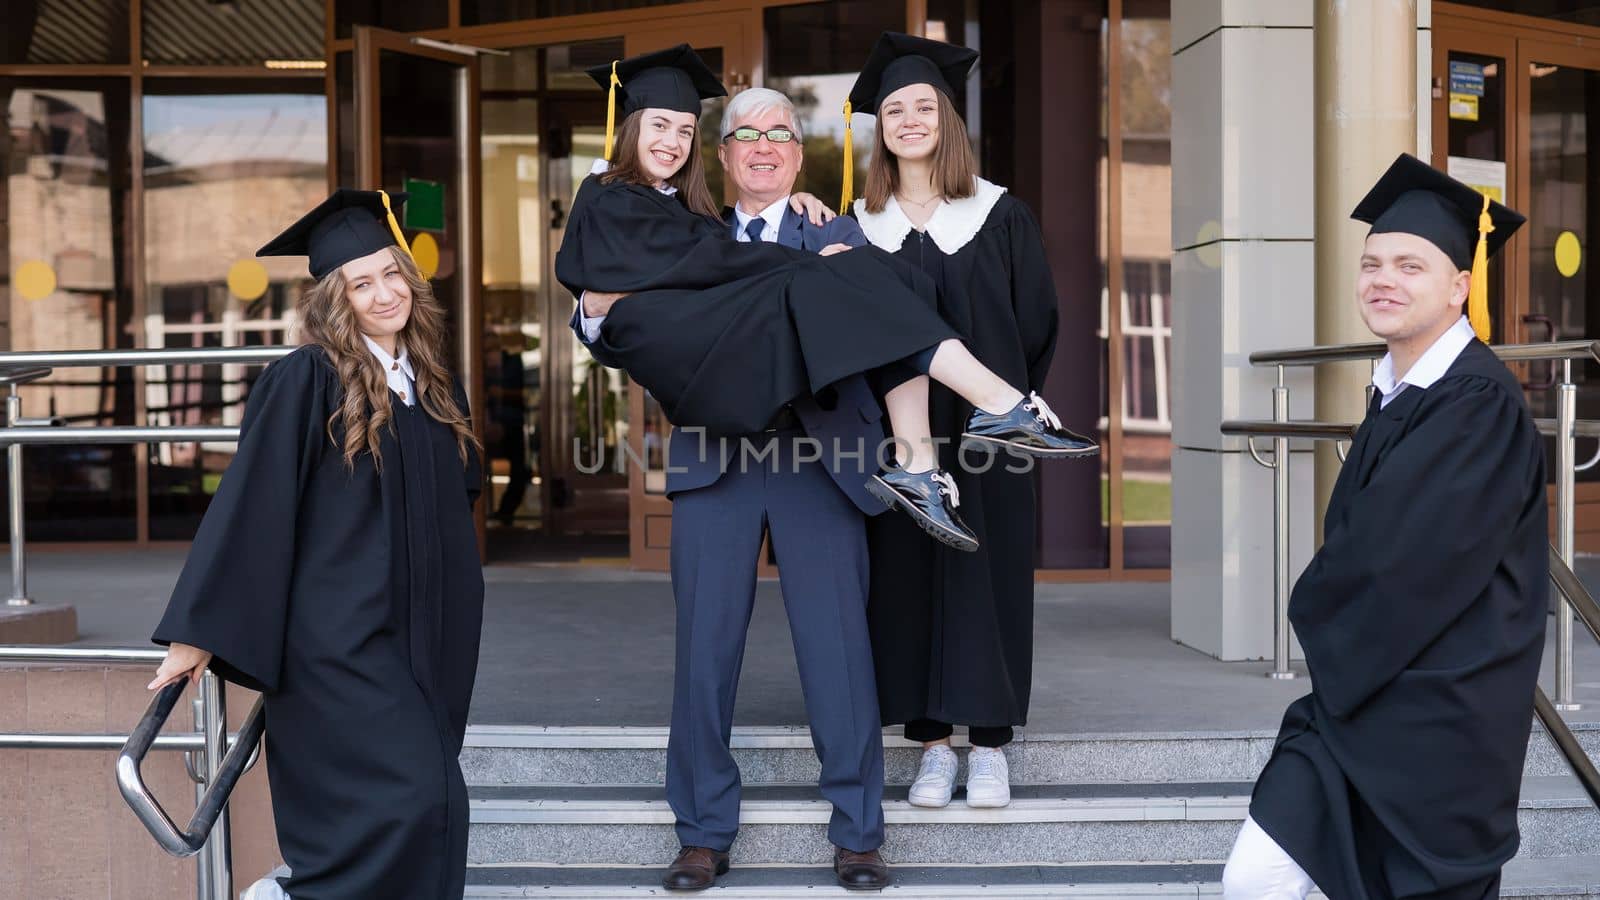 The teacher holds the graduate in his arms